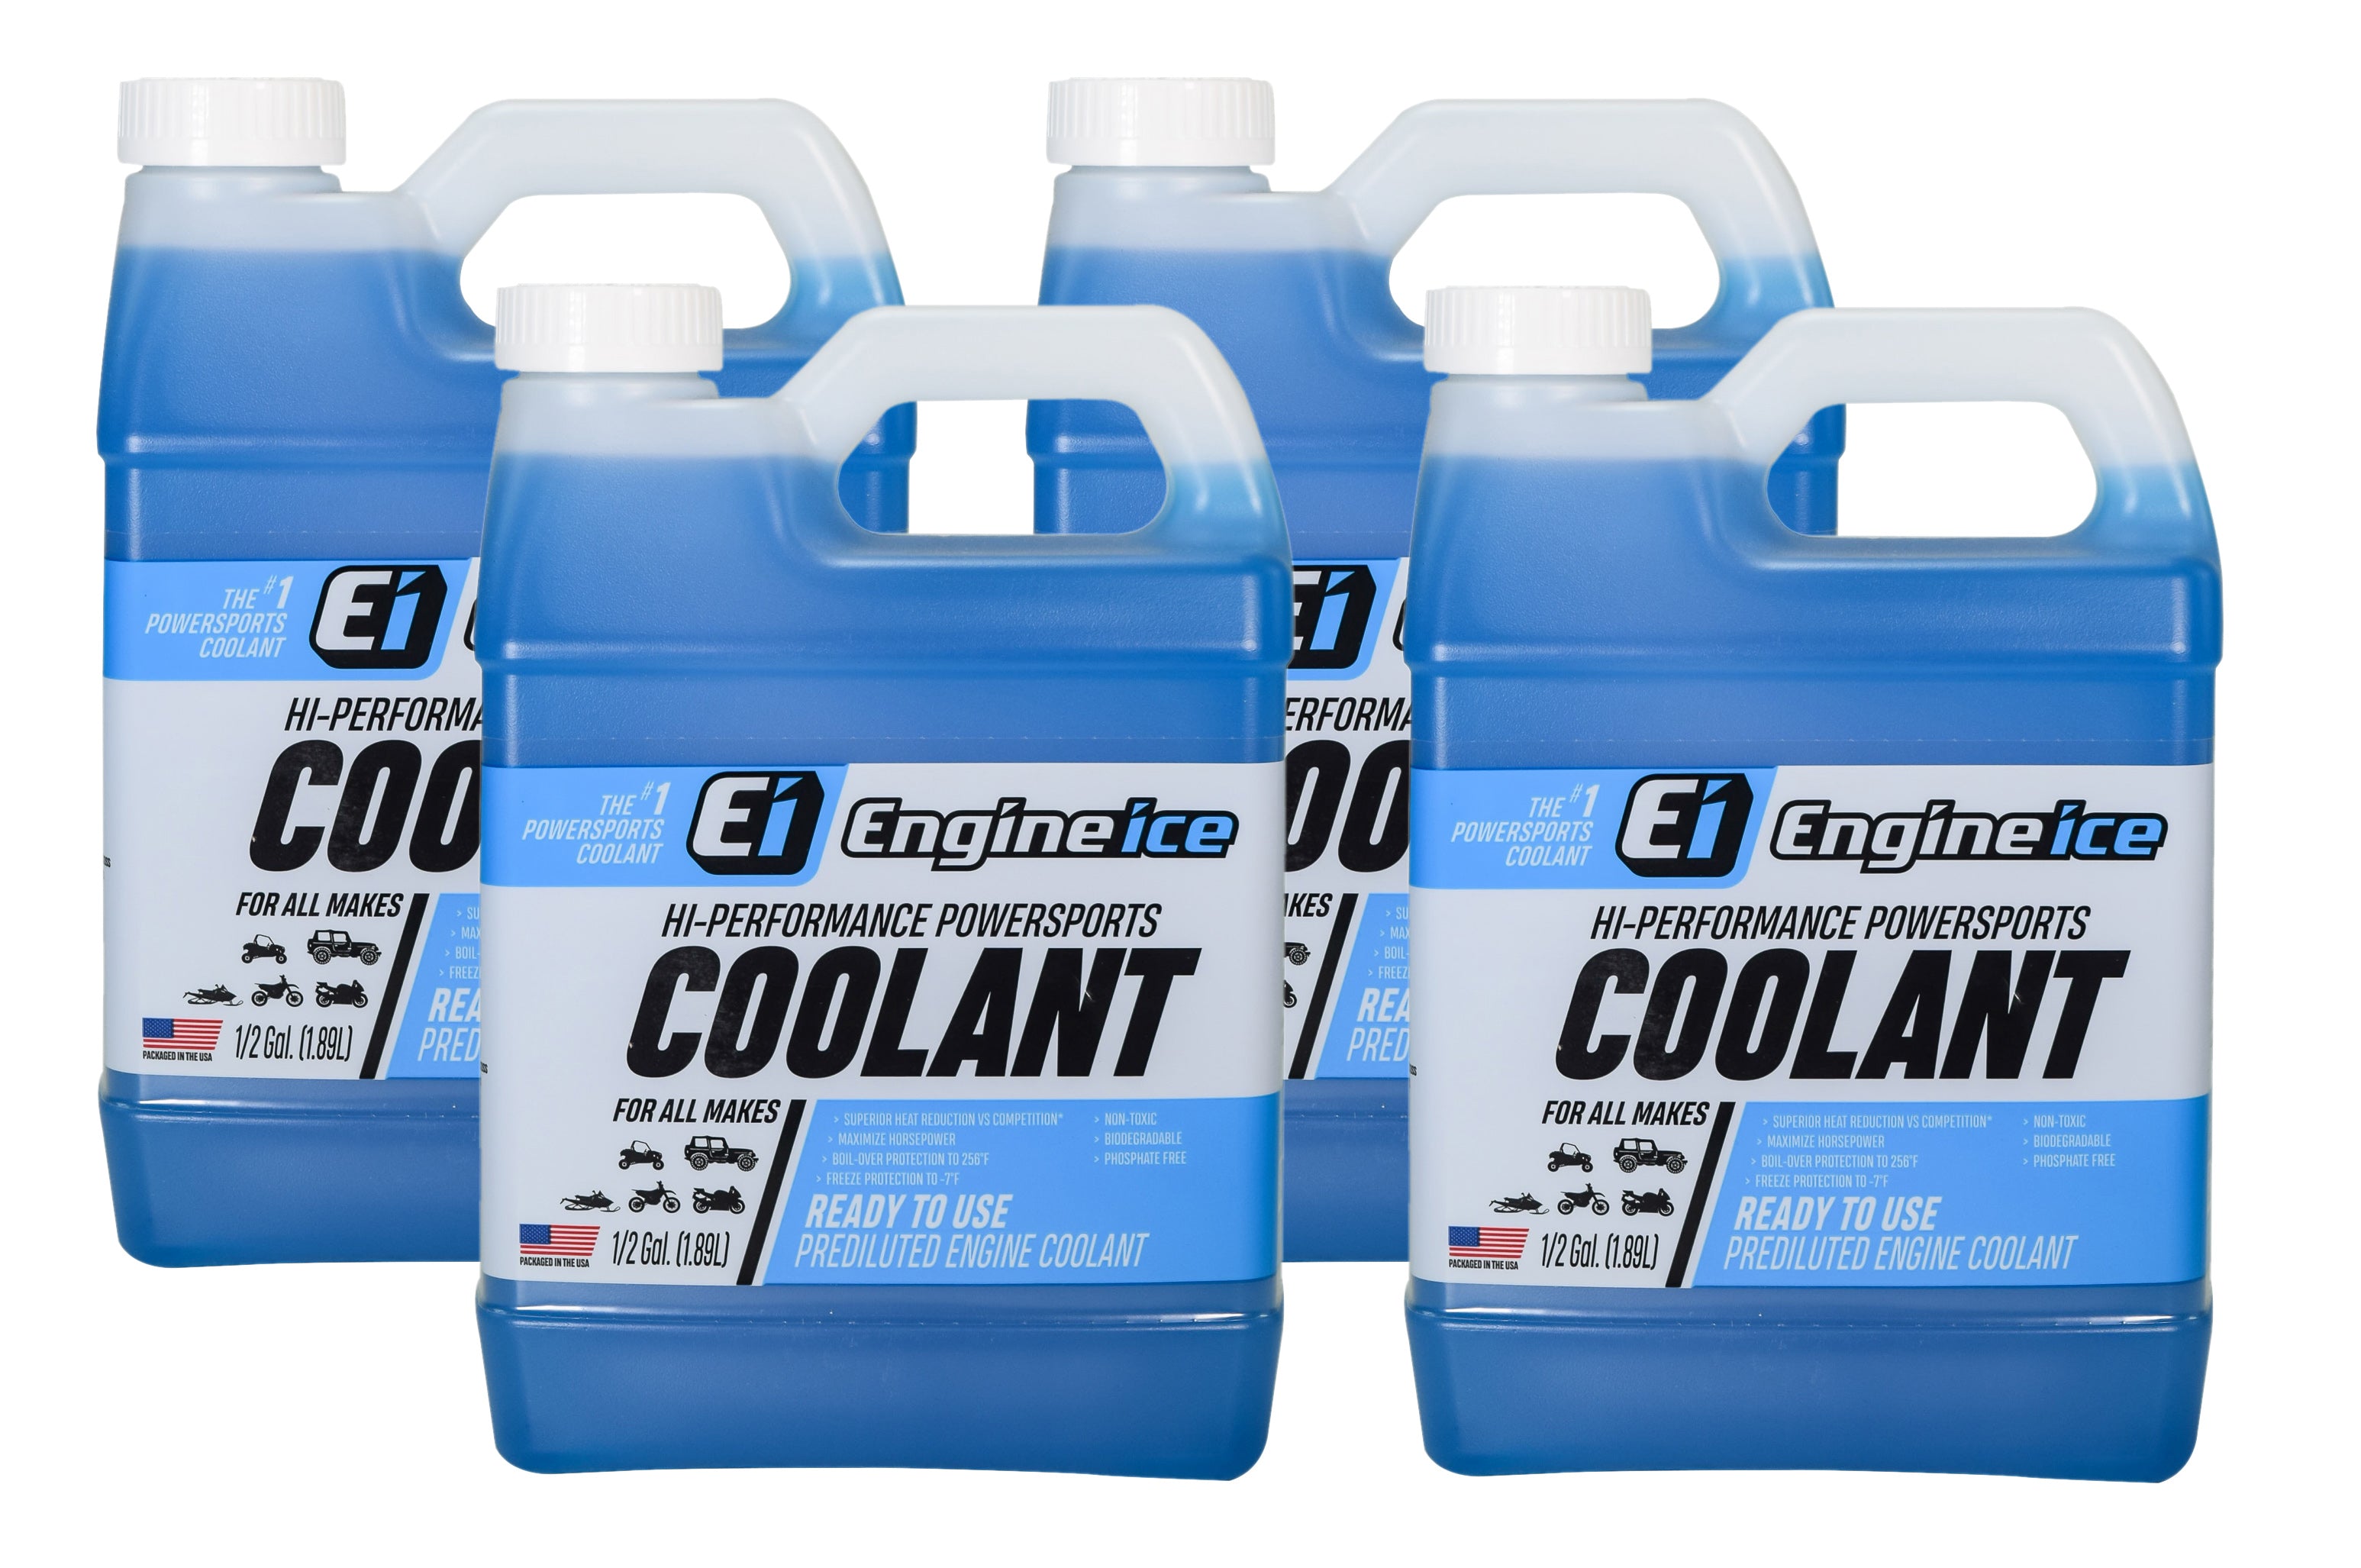 Engine-Ice-TYDS008-03-High-Performance-Coolant-0.5-gallon-4-Pack-image-1